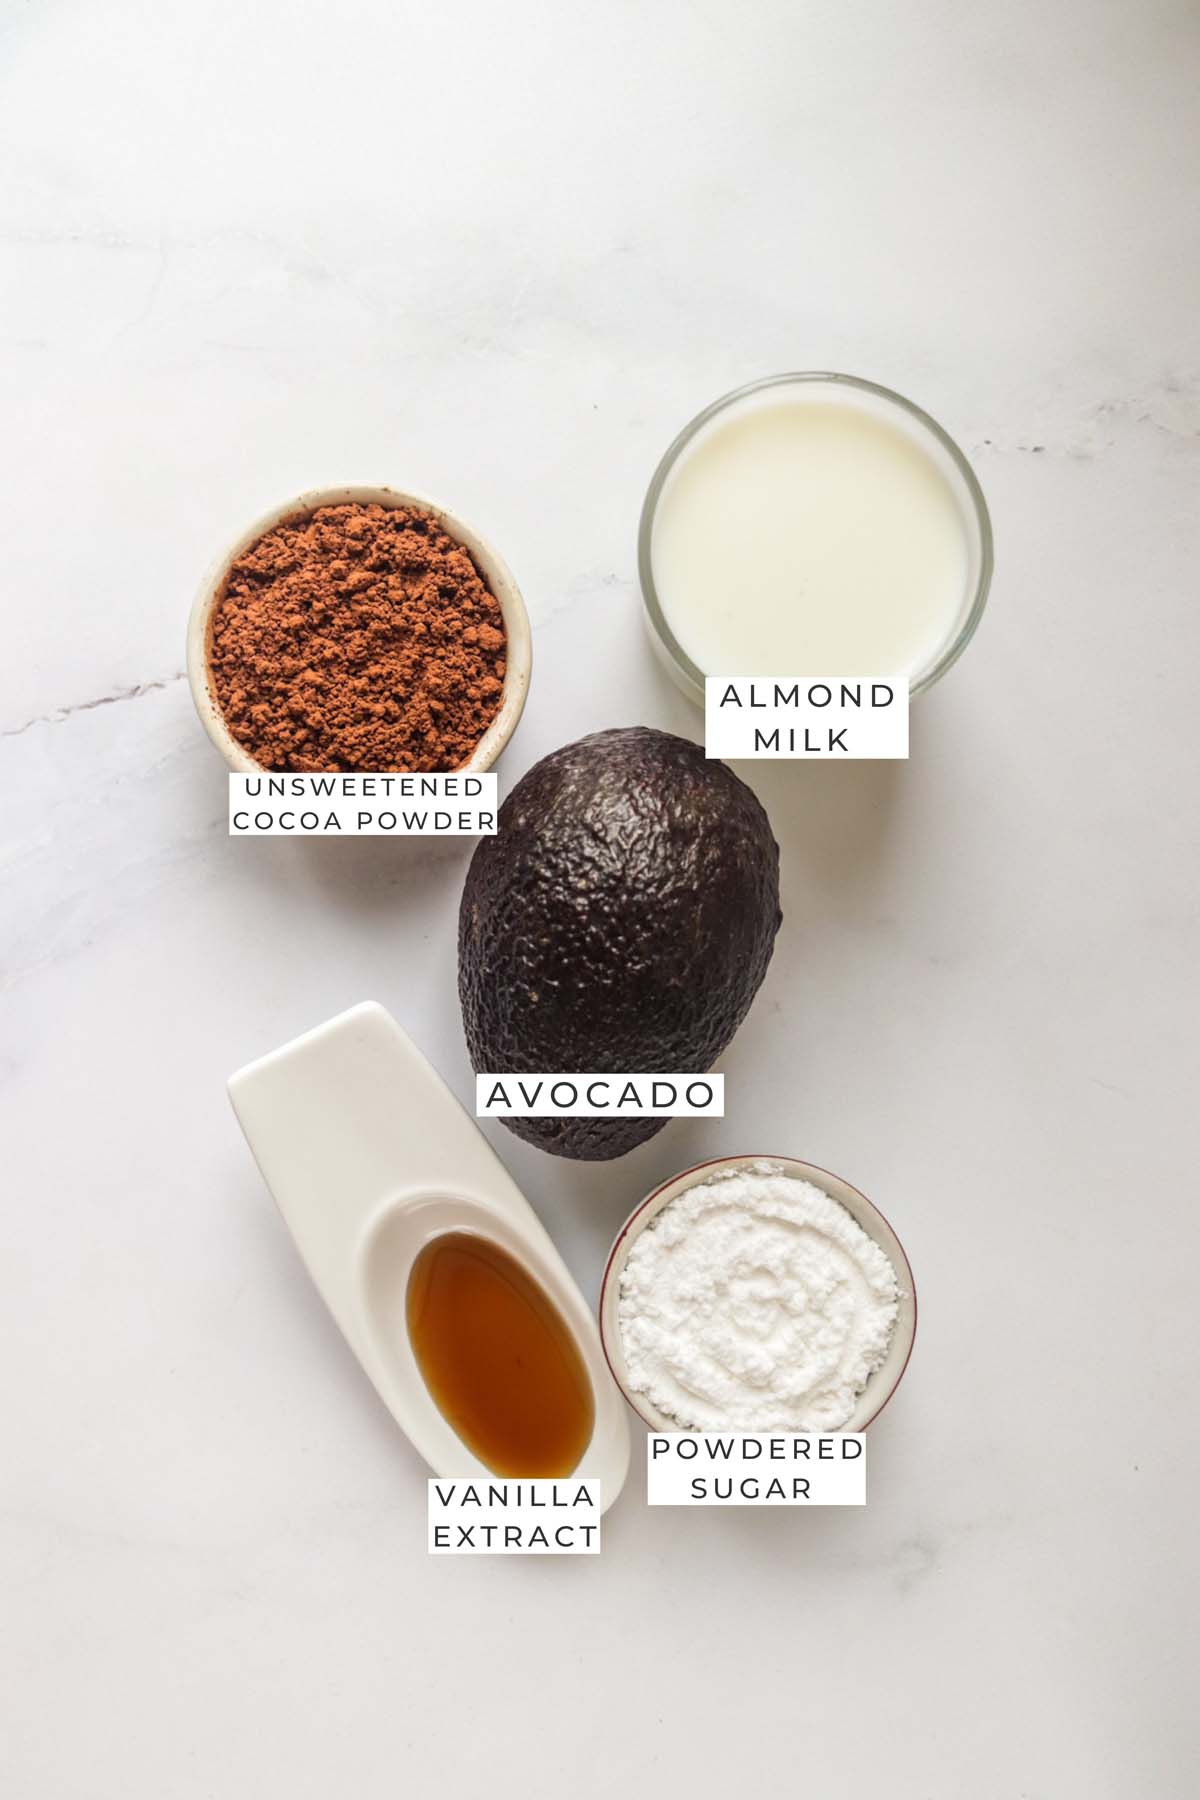 Labeled ingredients for the chocolate mousse.